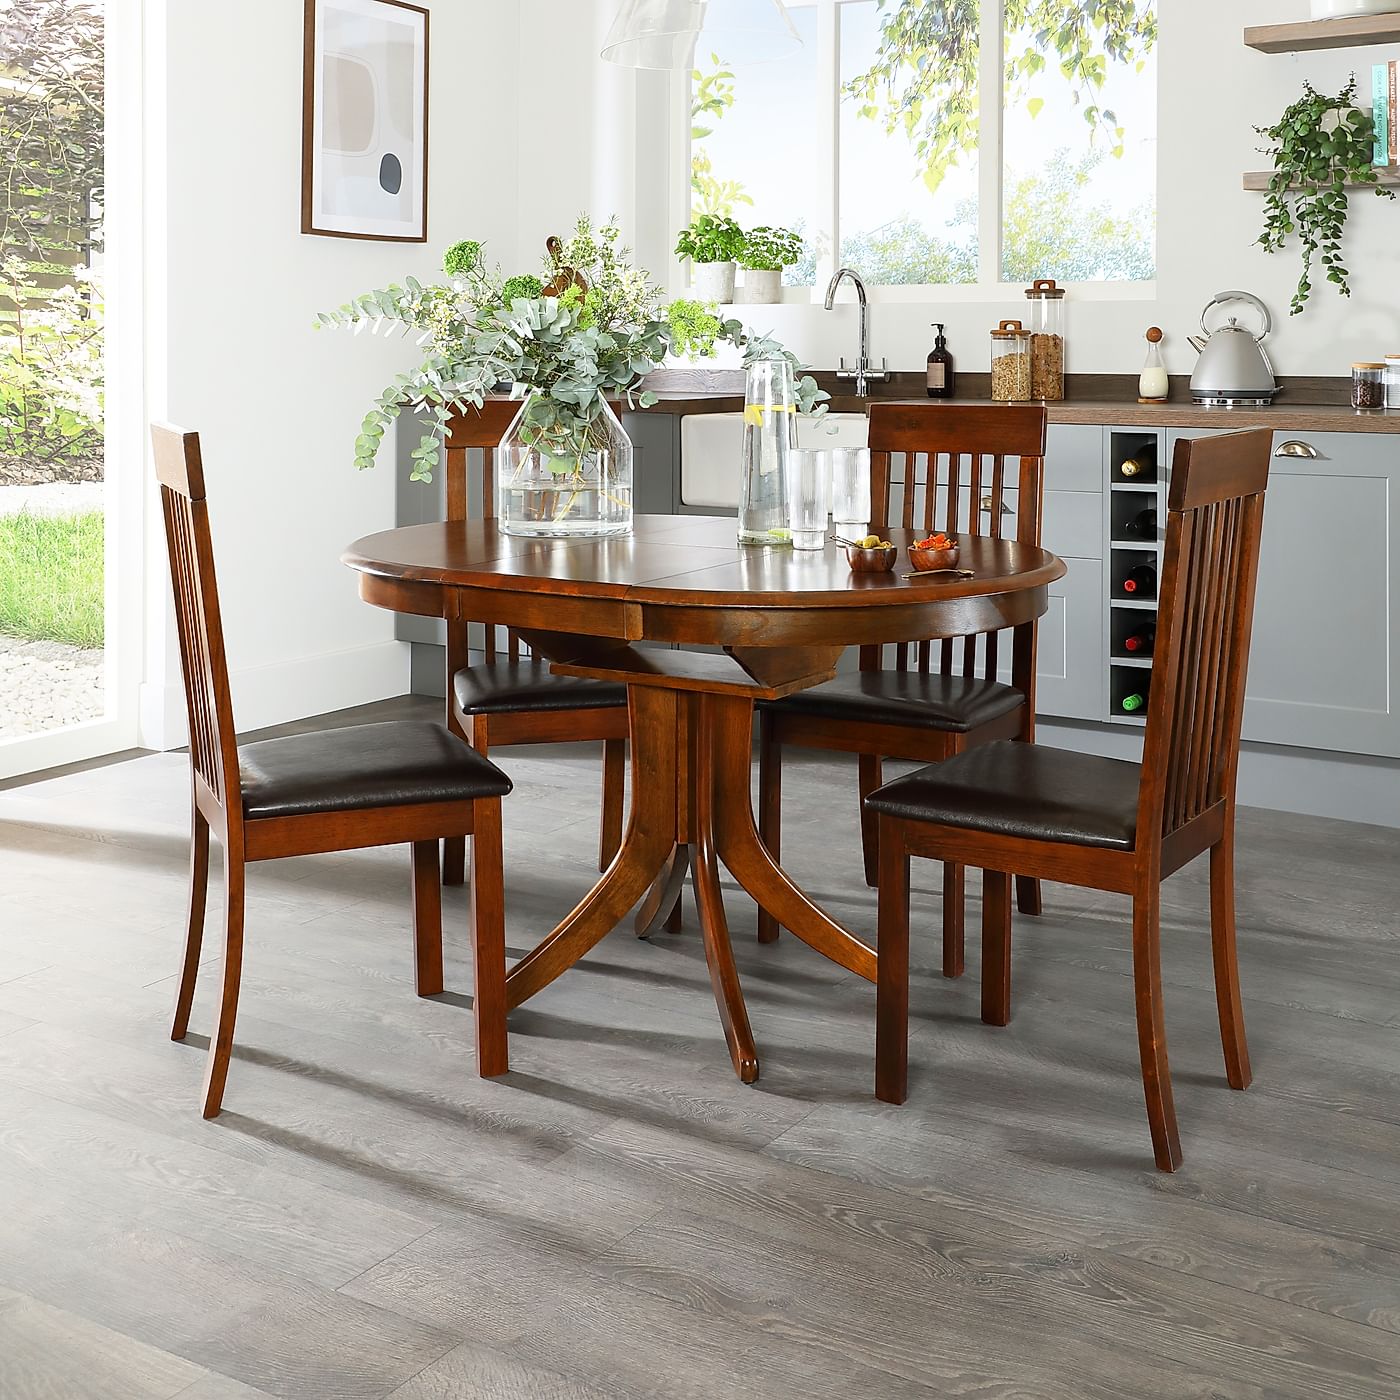 Dark Wood Dining Room Table And Chairs : Dark Wood Dining Room Table